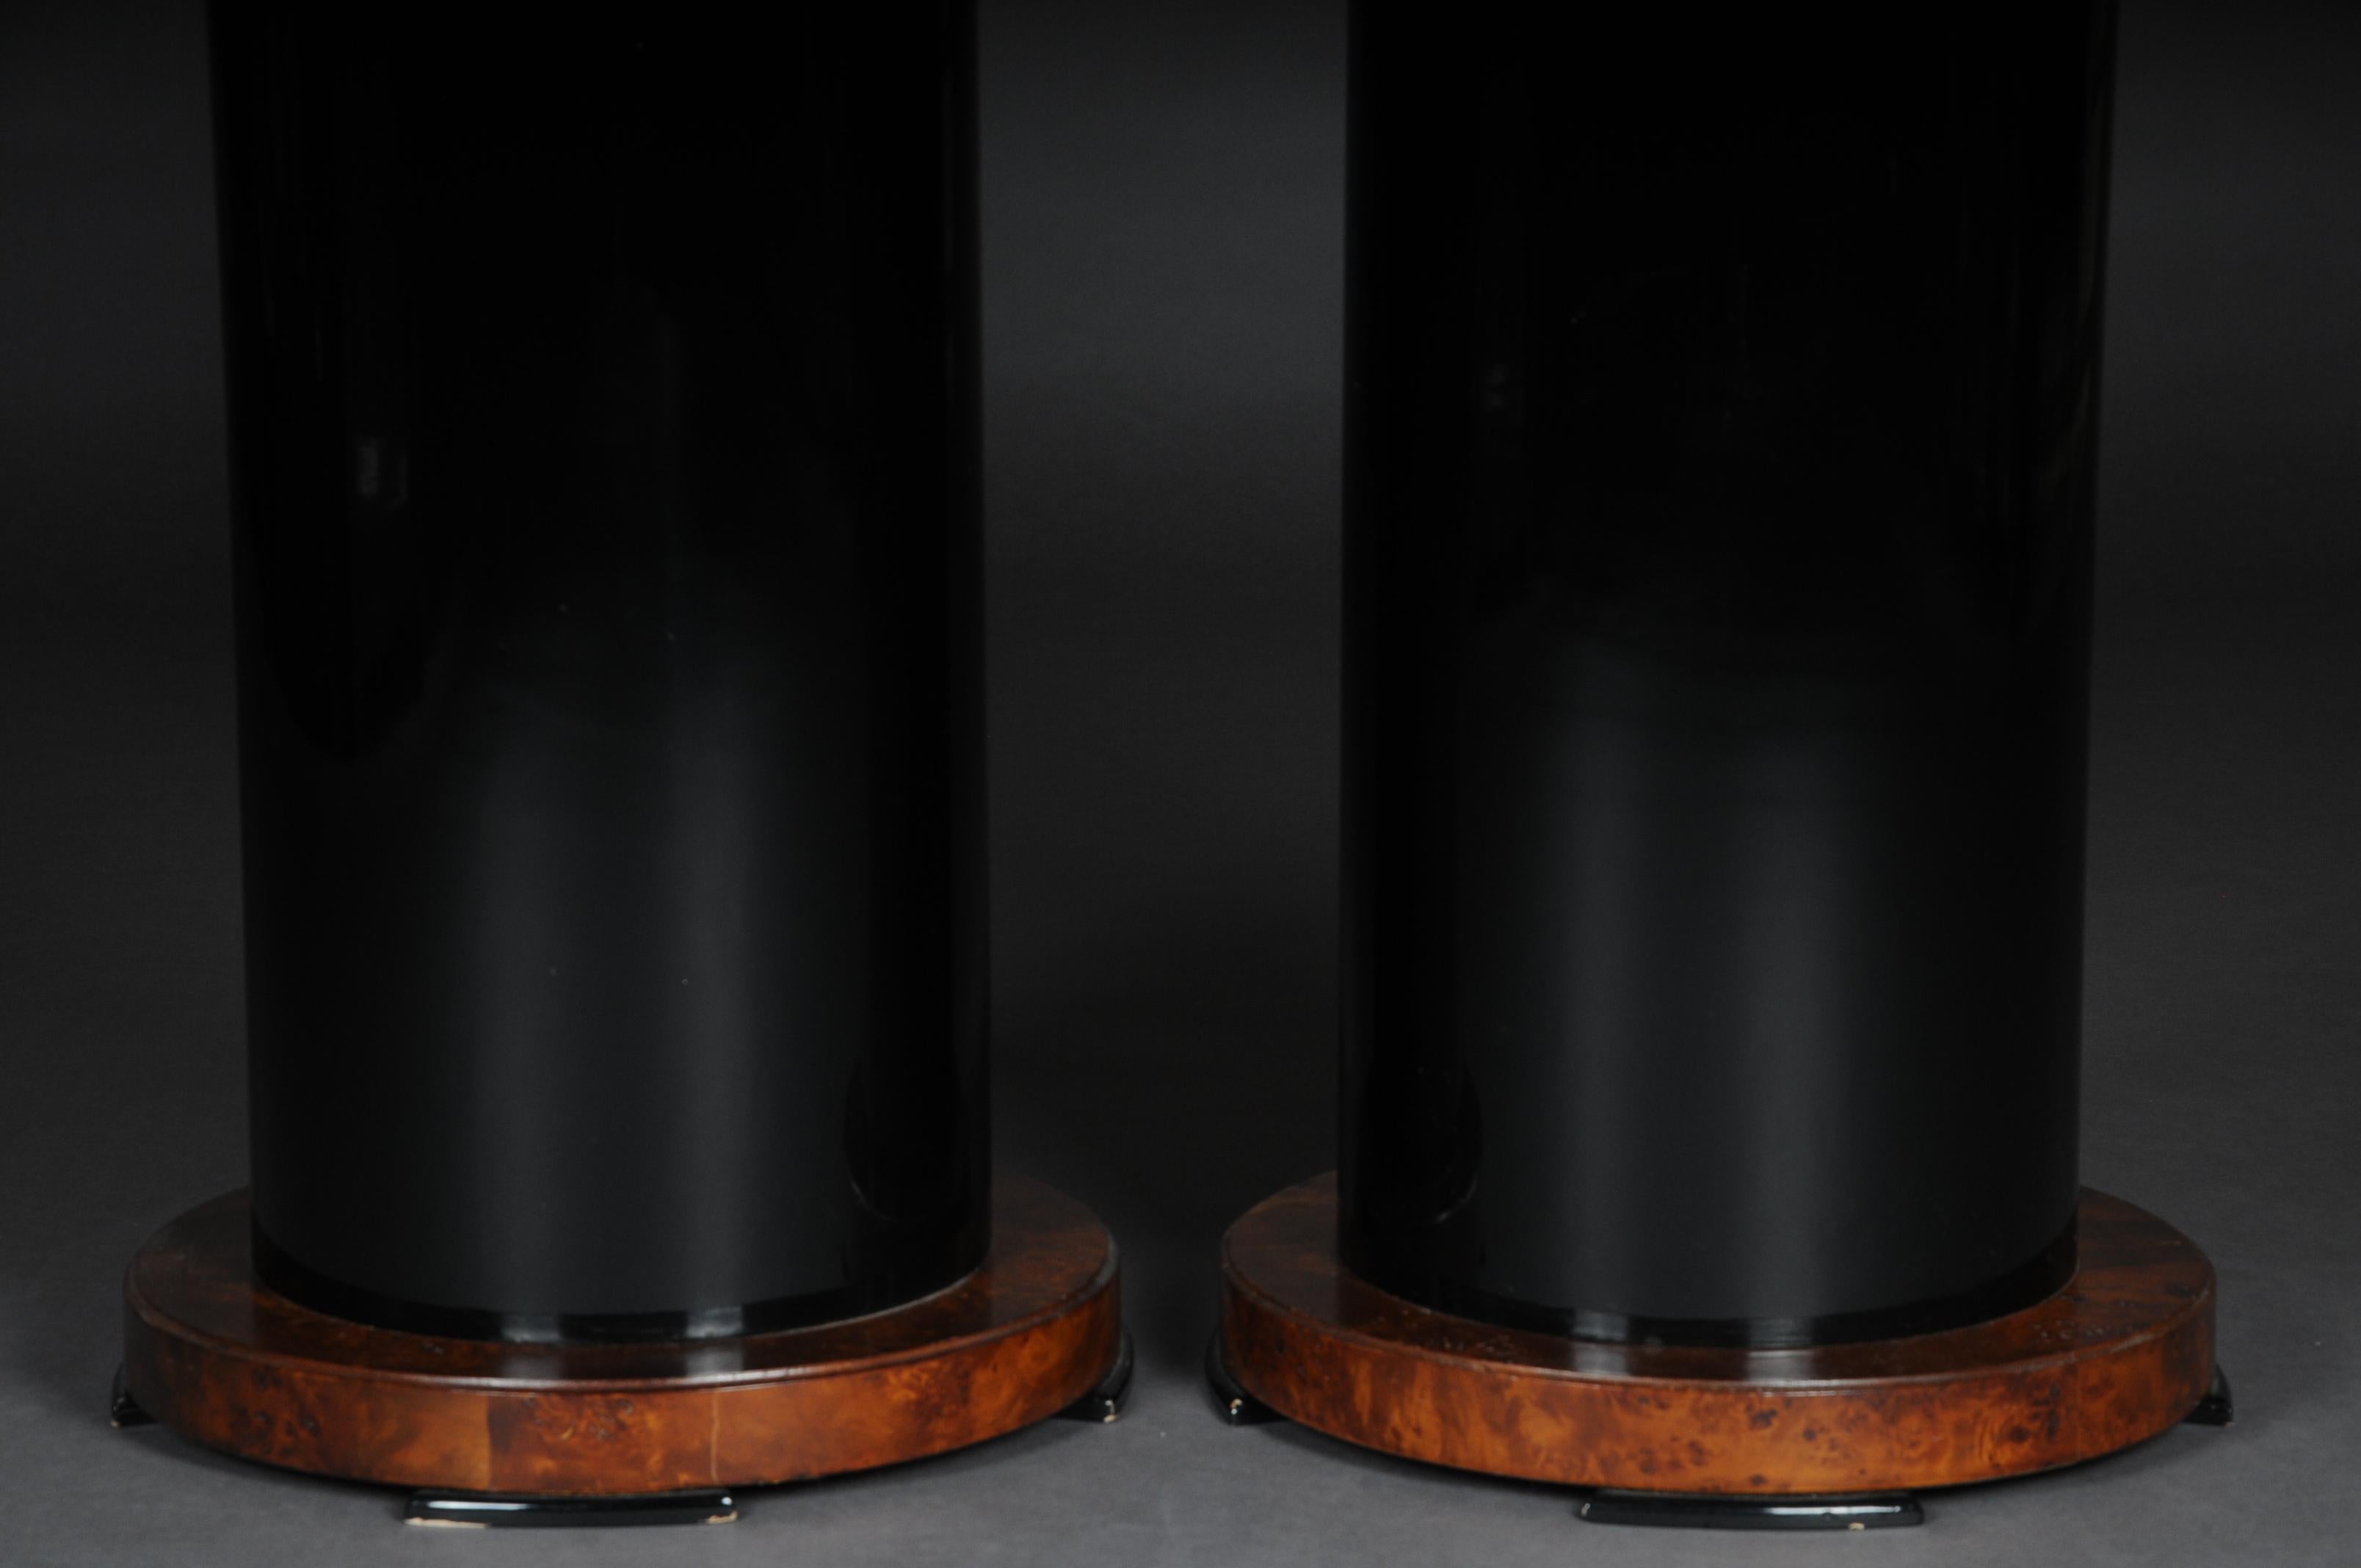 Pair of columns / pedestals in Art Deco style

Blackened shaft on softwood. Round bottom plate, center straight column shaft. Extremely decorative and timeless.


(K-34).